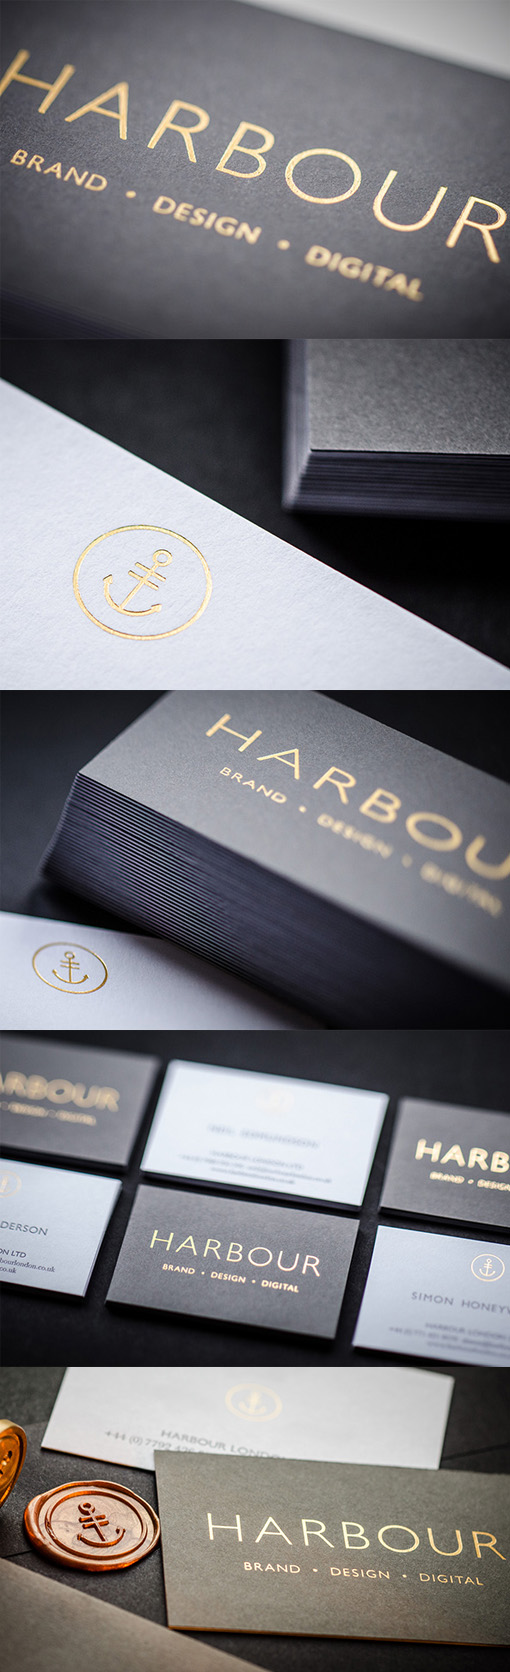 Stylish And Professional Gold Foiled Black And White Business Card Design